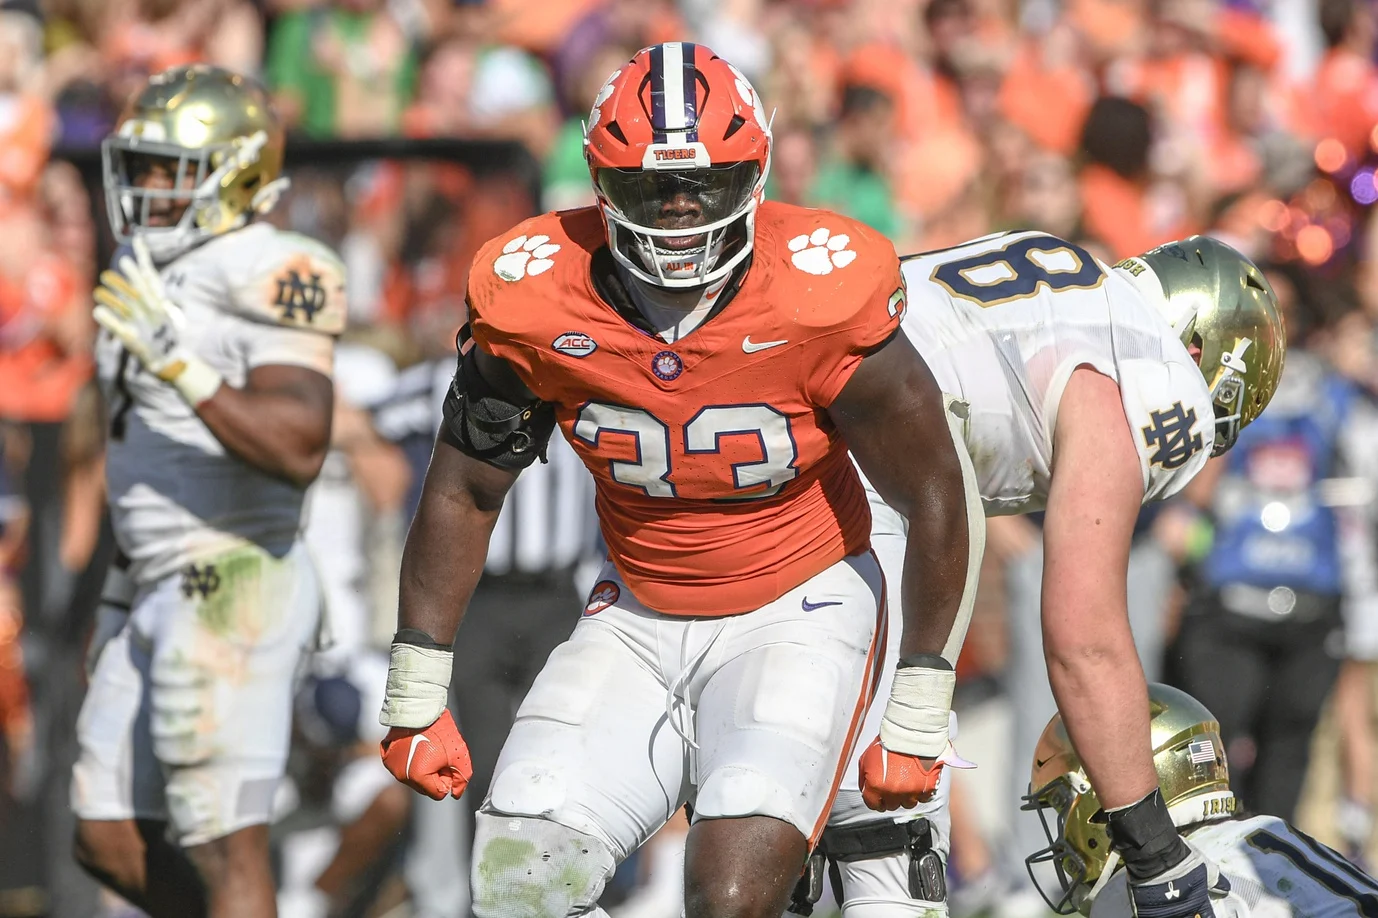 NFL News: Atlanta Falcons Secure Clemson’s Ruke Orhorhoro in Bold Second Round Move